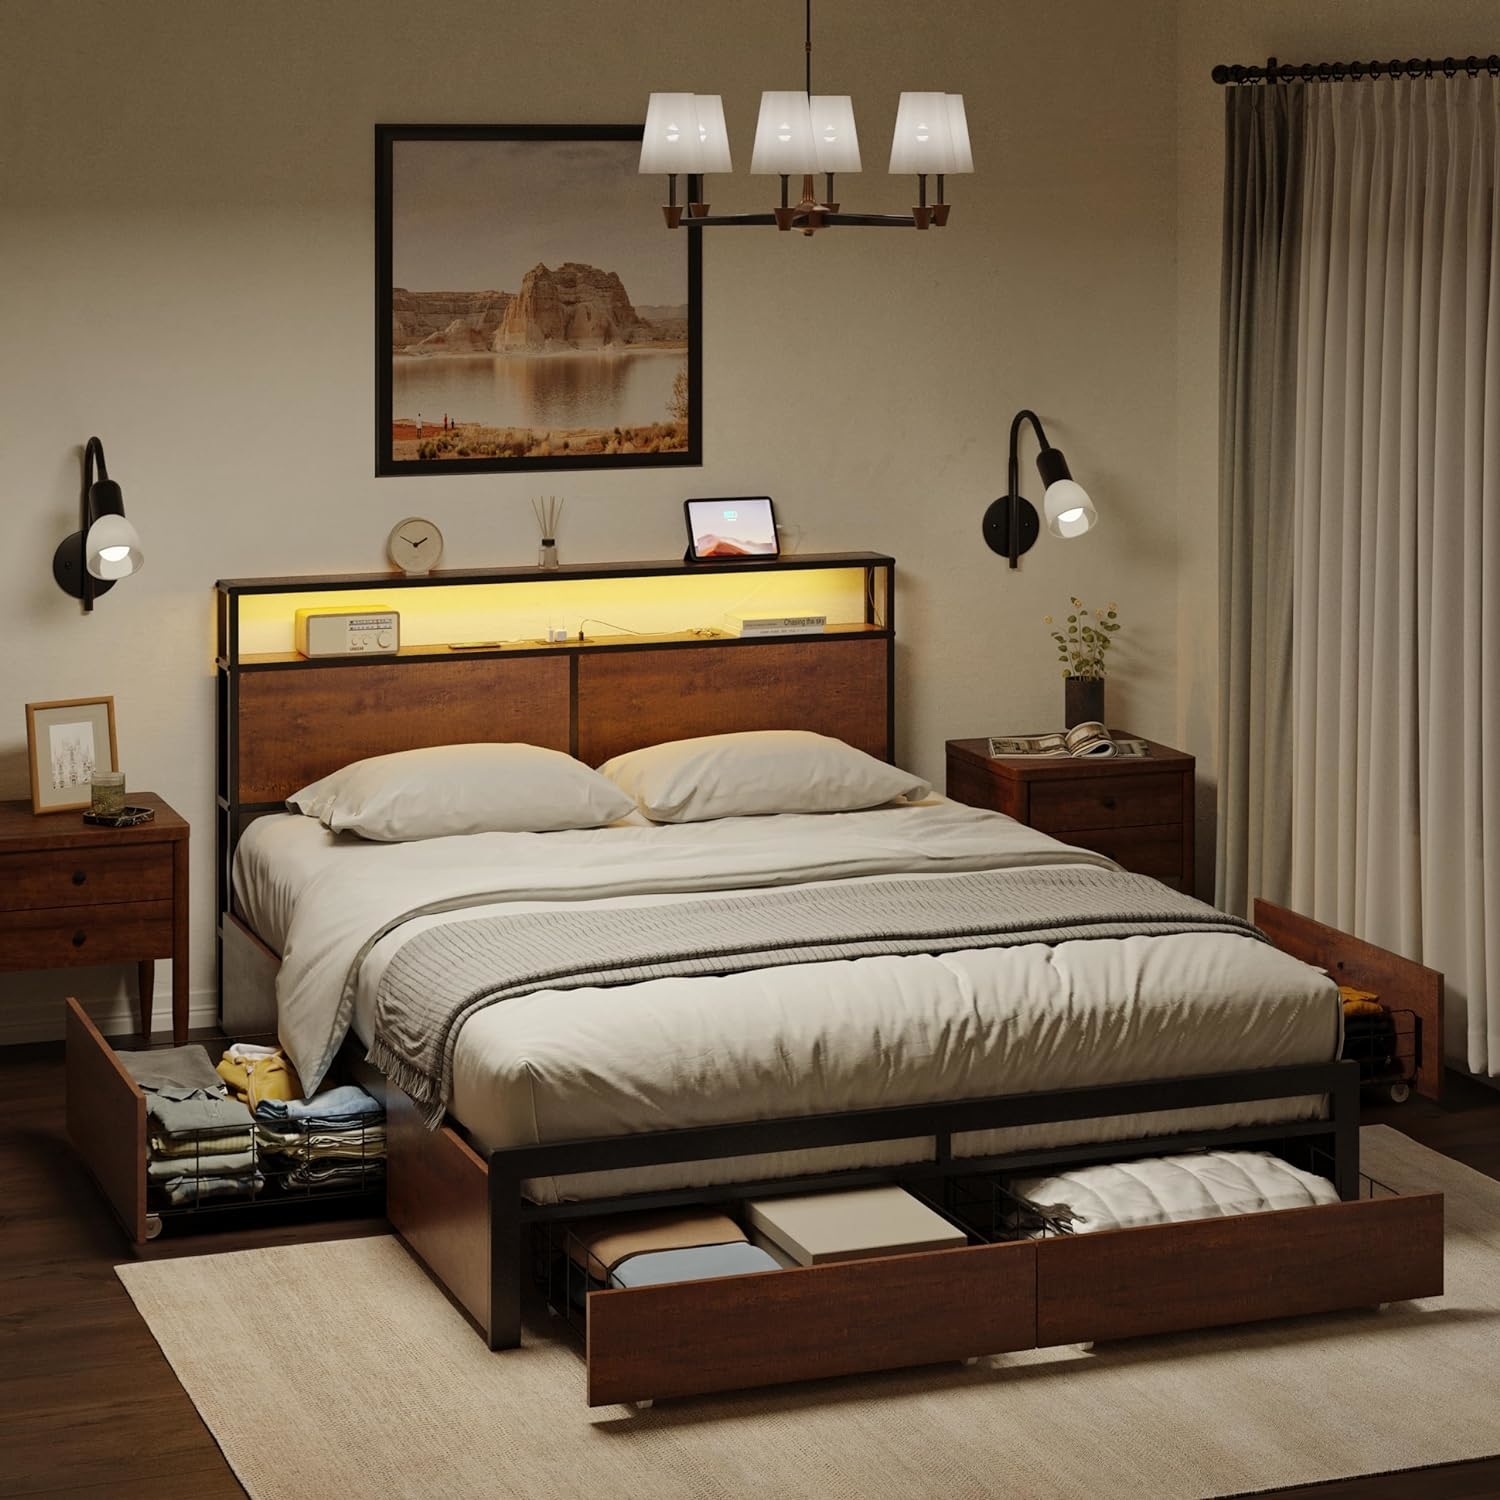 A modern bedroom with a neatly made bed, nightstands, and a pull-out bed drawer